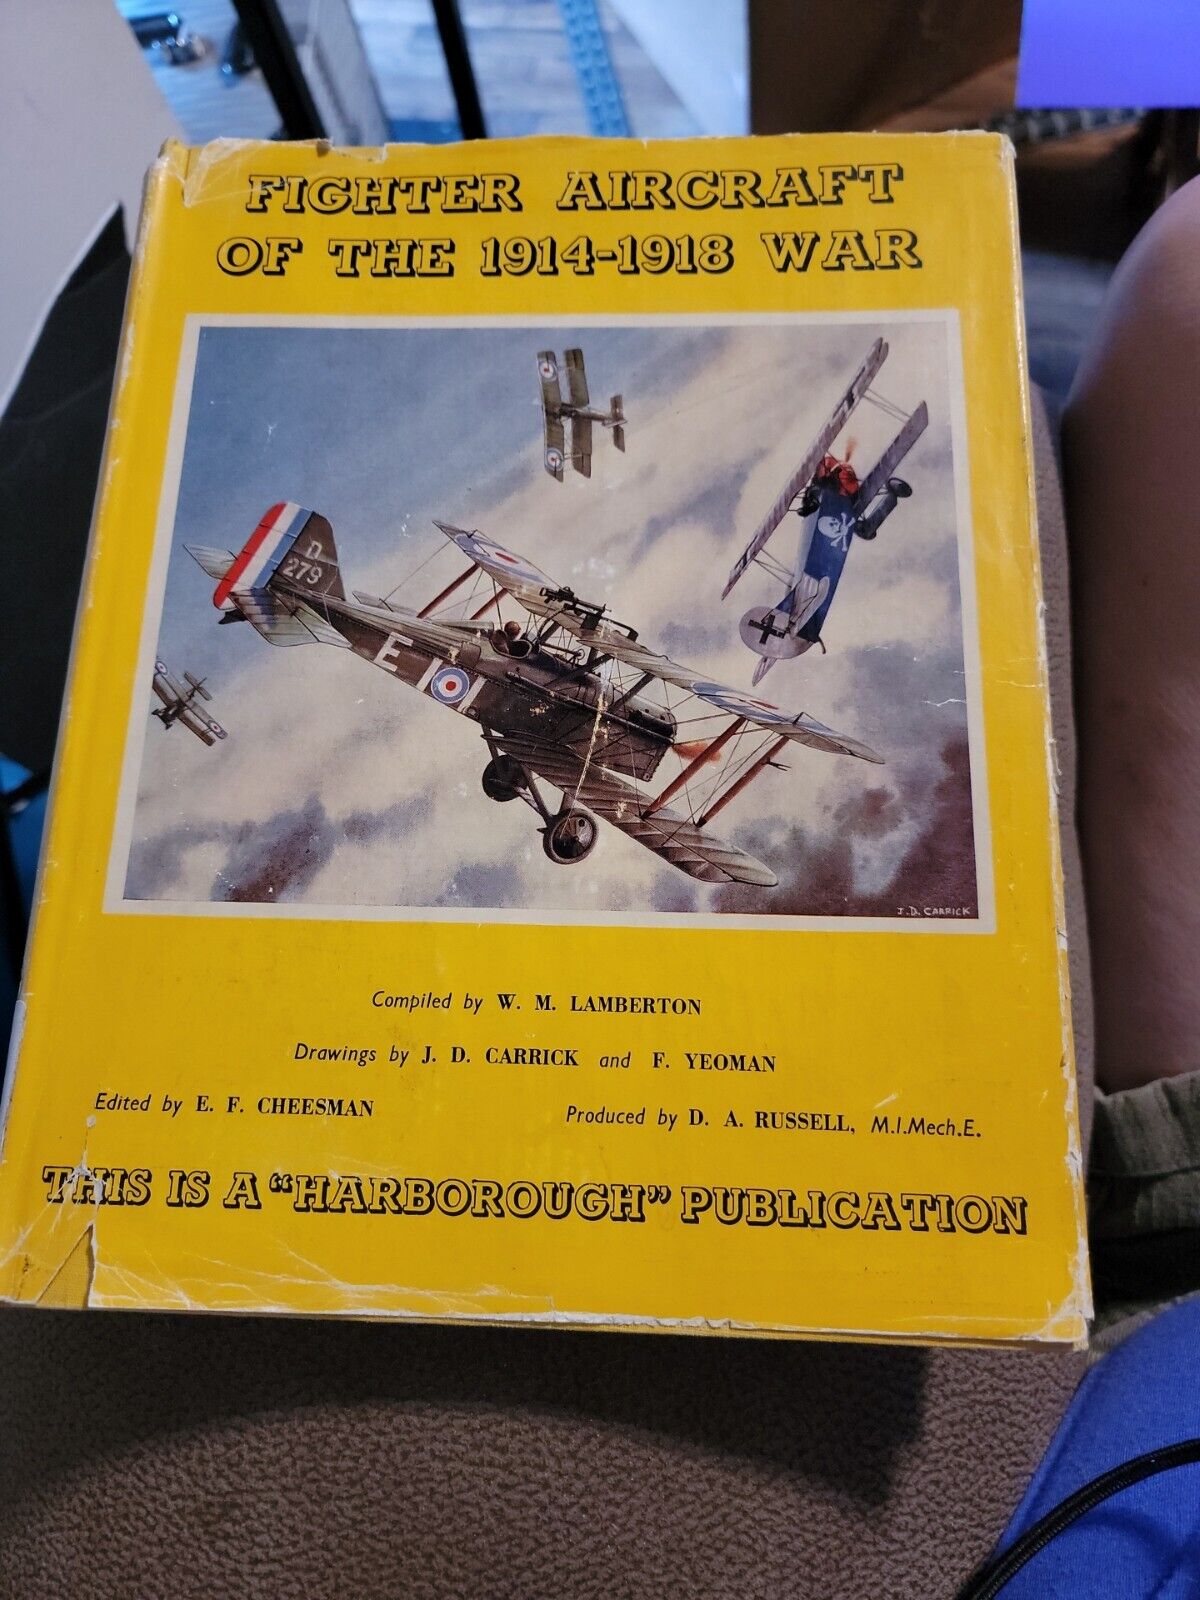 Fighter Aircraft of the 1914-1918 War by Lamberton, W. M.